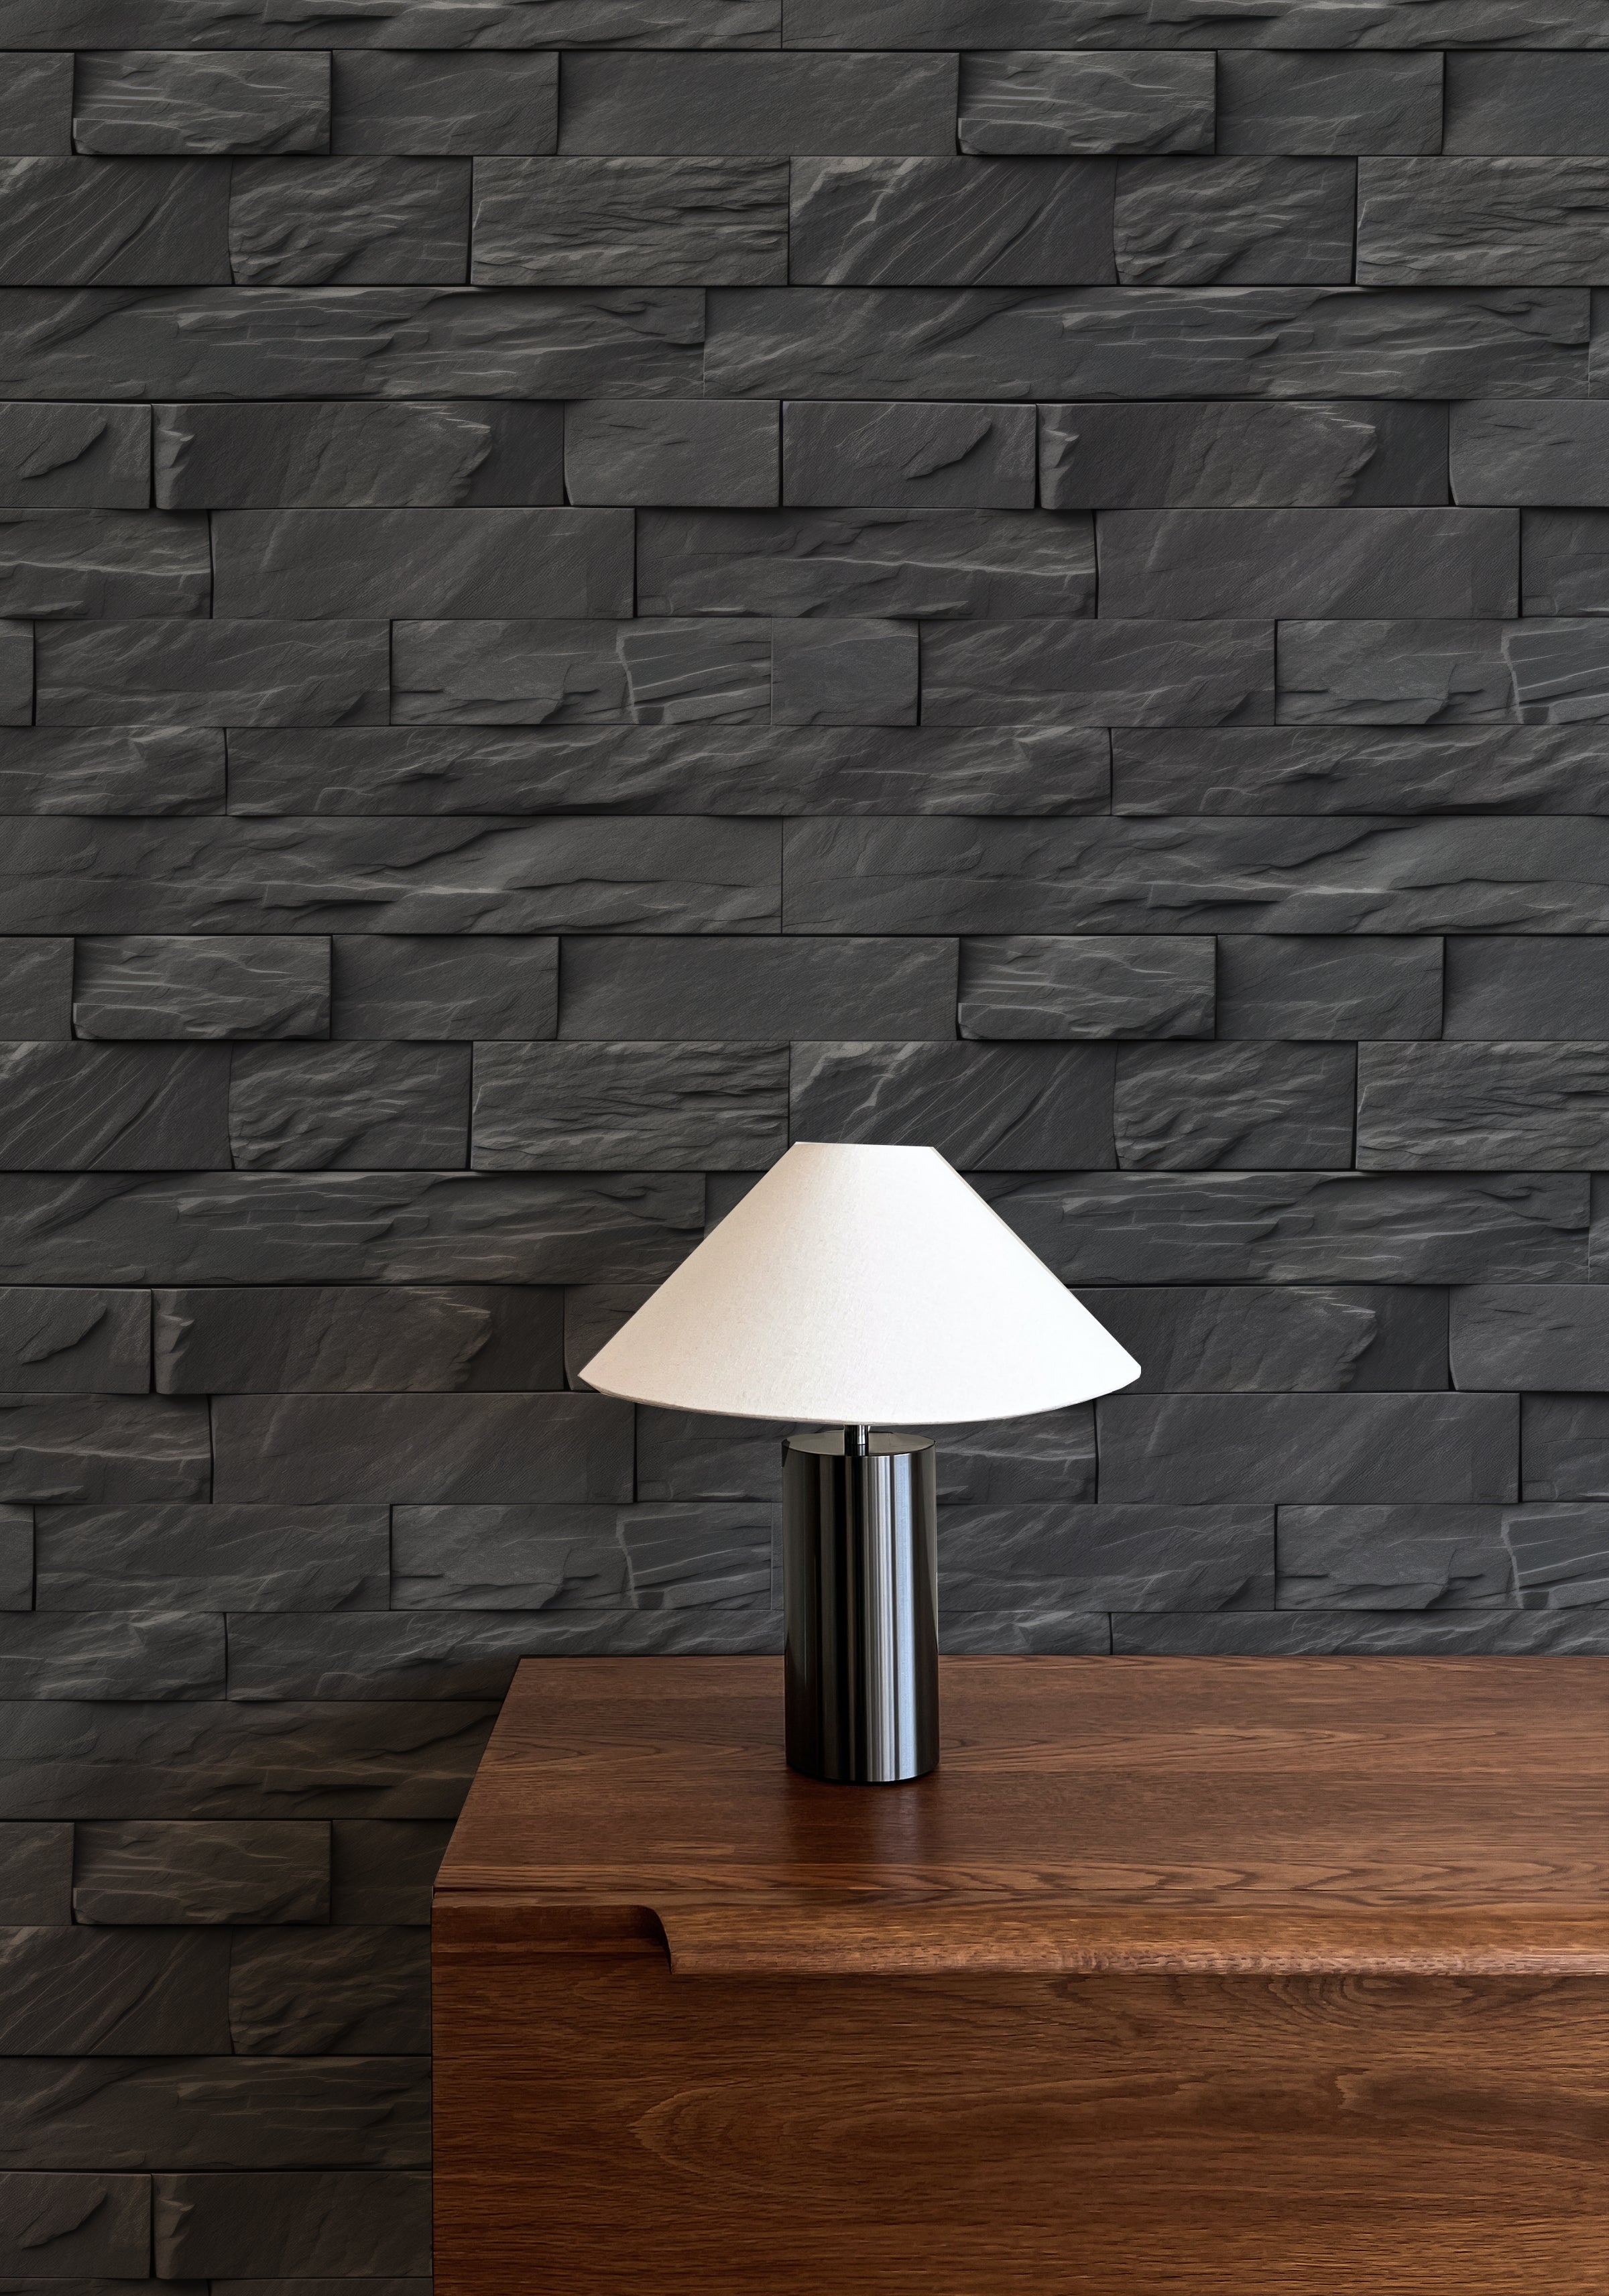 A modern interior with Black Brick Wallpaper featuring a textured, stacked stone design in dark gray. The wallpaper provides a striking backdrop for a wooden sideboard and a minimalist black table lamp with a white shade.